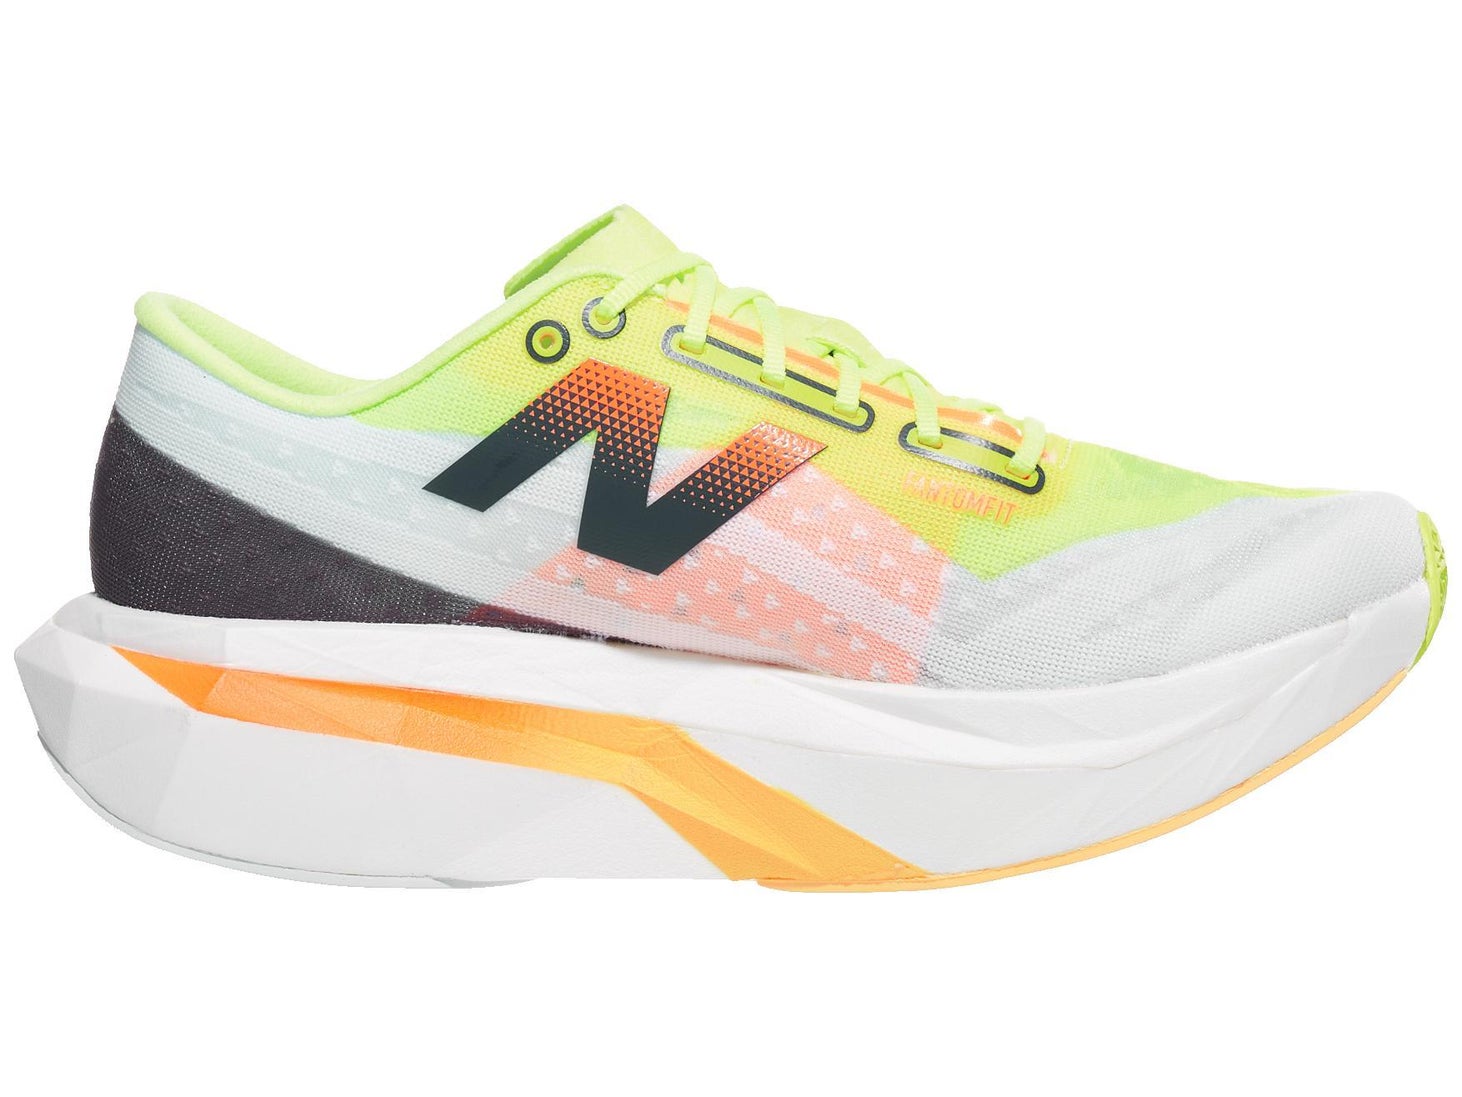 Medial view of right shoe of New Balance FuelCell SuperComp Elite v4. Upper is white with an orange and black New Balance logo and the midsole is white with a neon orange streak in the middle.